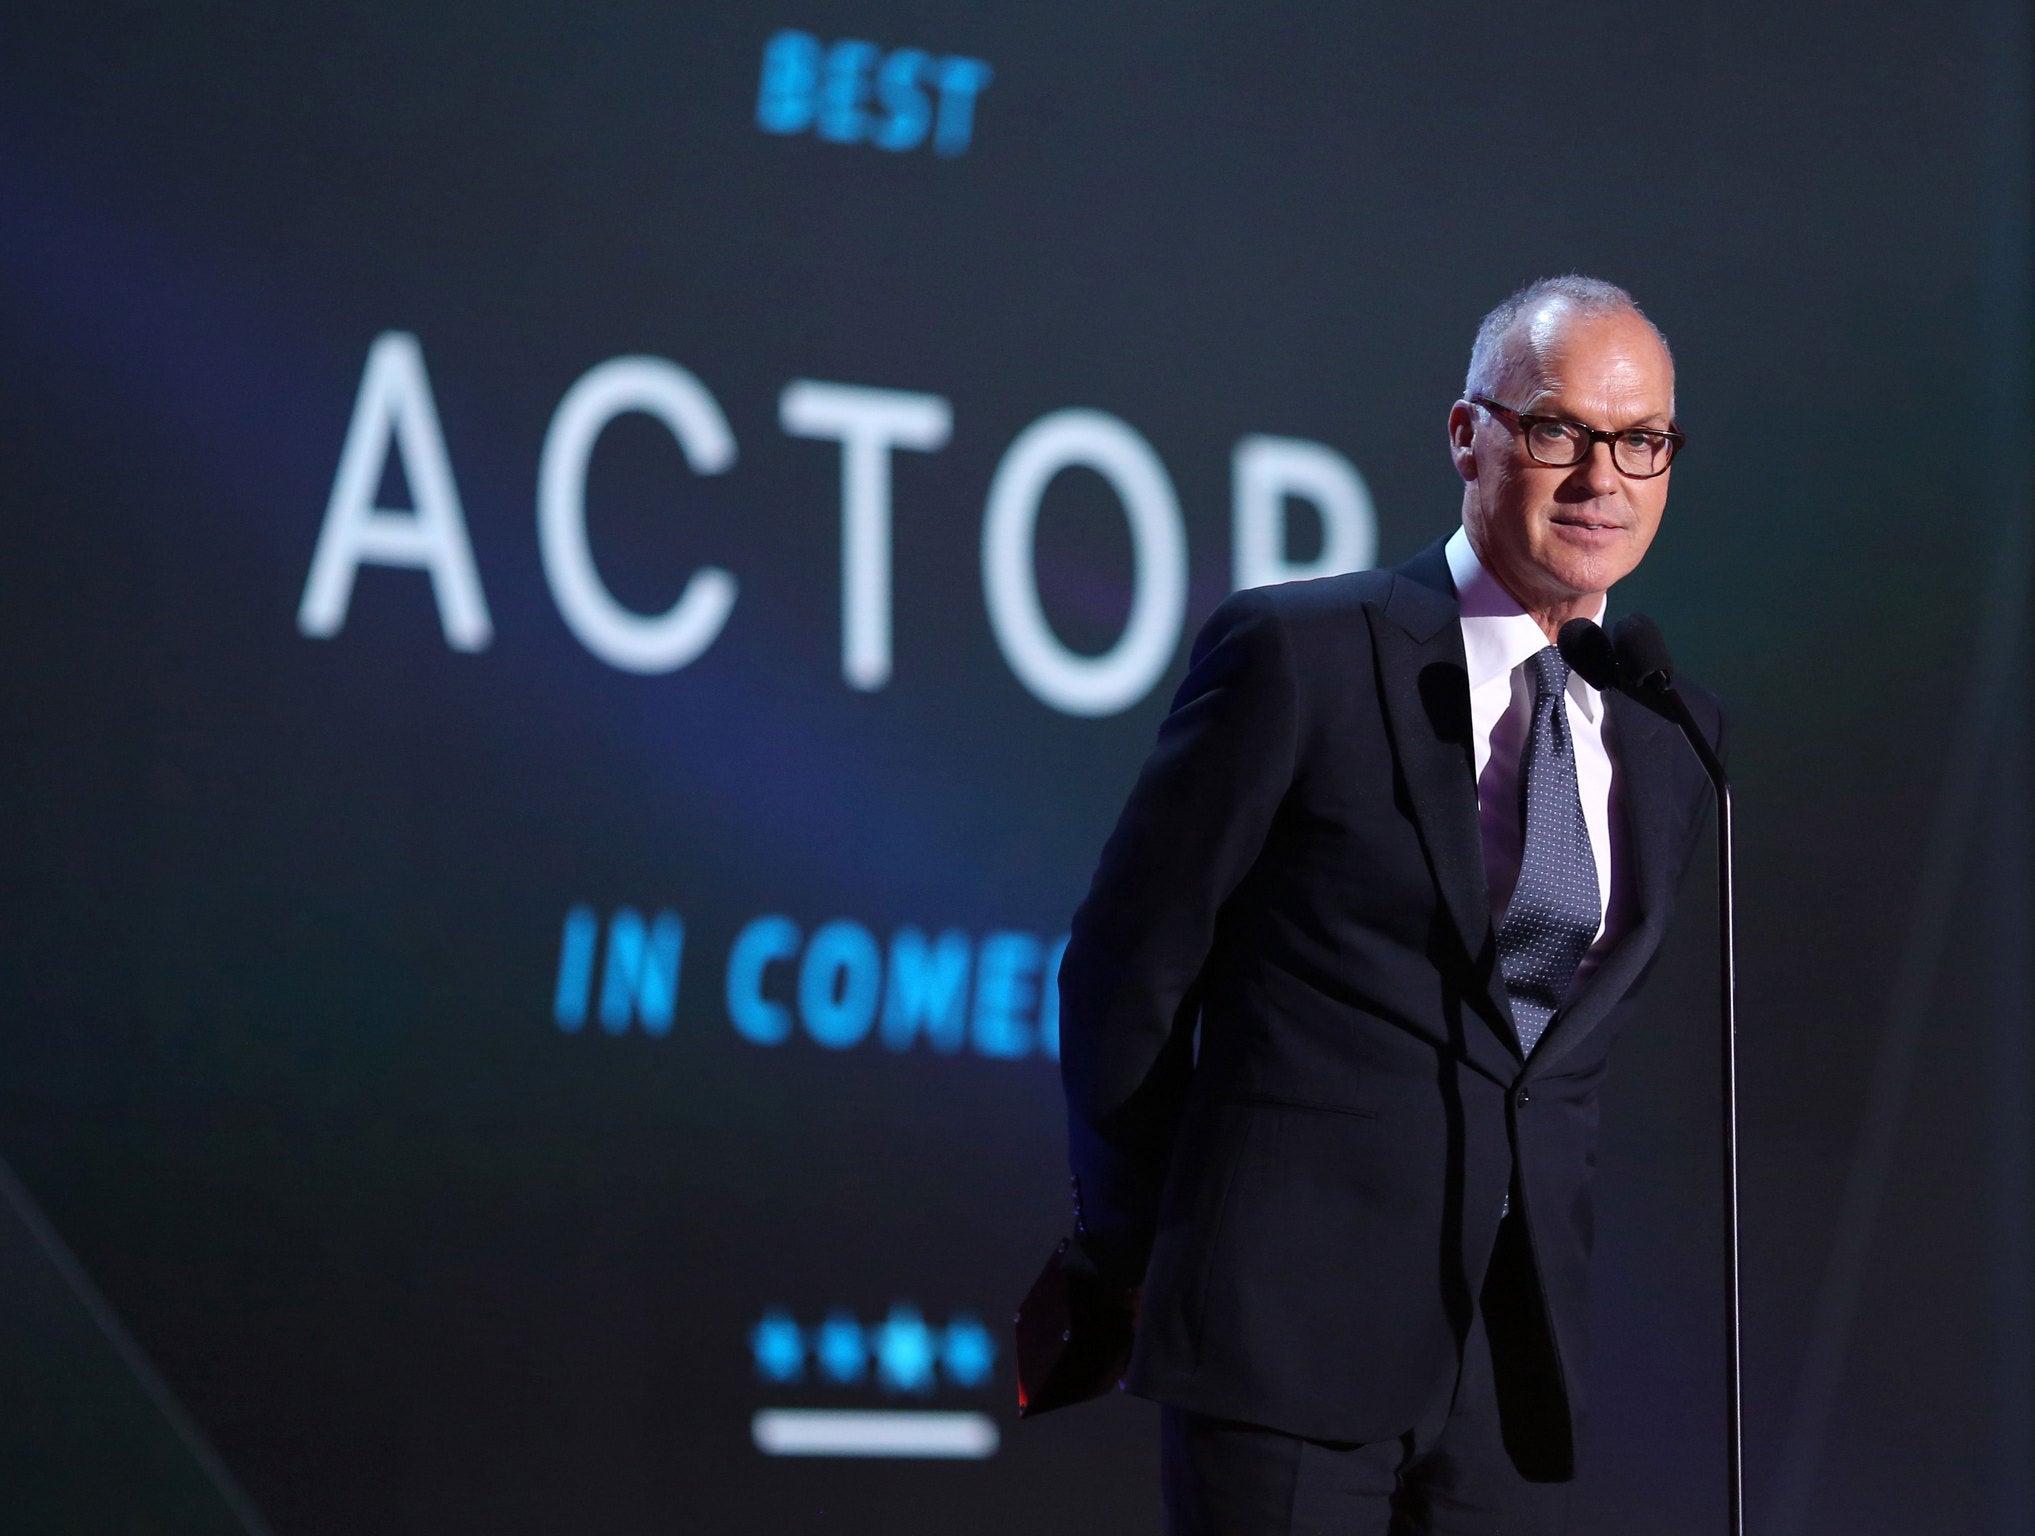 Michael Keaton become the first person in the Awards' history to win three awards in one year